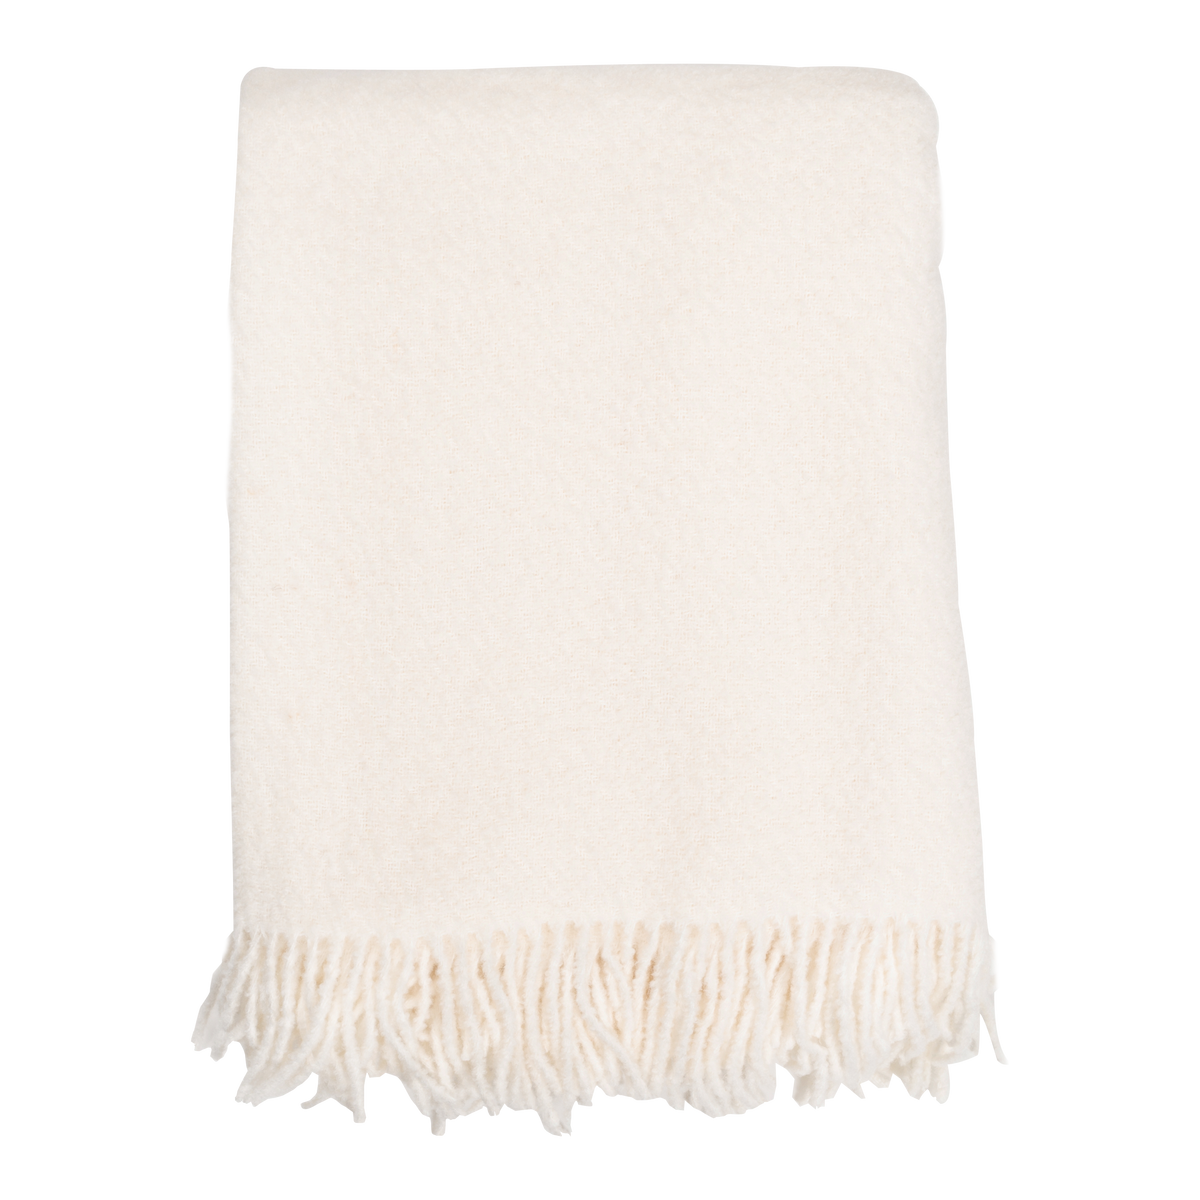 Woven exclusively with wool from New Zealand, which is known for its superior quality and beautiful luster, the Wool Boucle Throw is sourced from Ukrainian mills and provides a exc